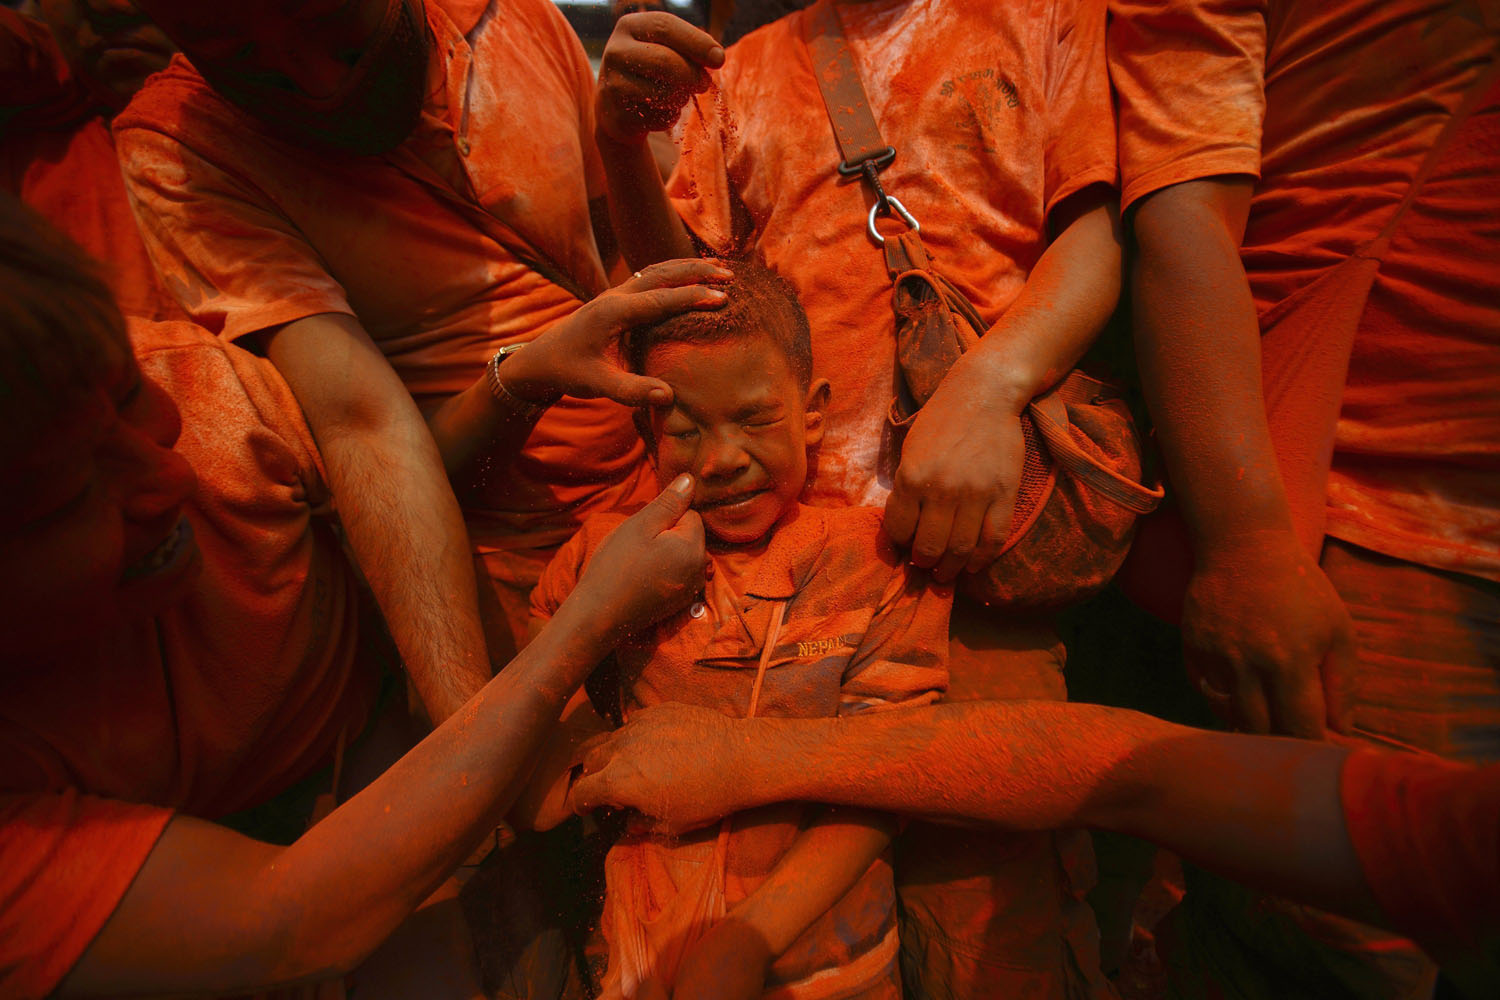 April 15, 2013. A boy is smeared with vermillion powder while celebrating  Sindoor Jatra  vermillion powder festival at Thimi, near Kathmandu. The festival is celebrated to mark the Nepalese New Year and the beginning of spring season in Nepal.